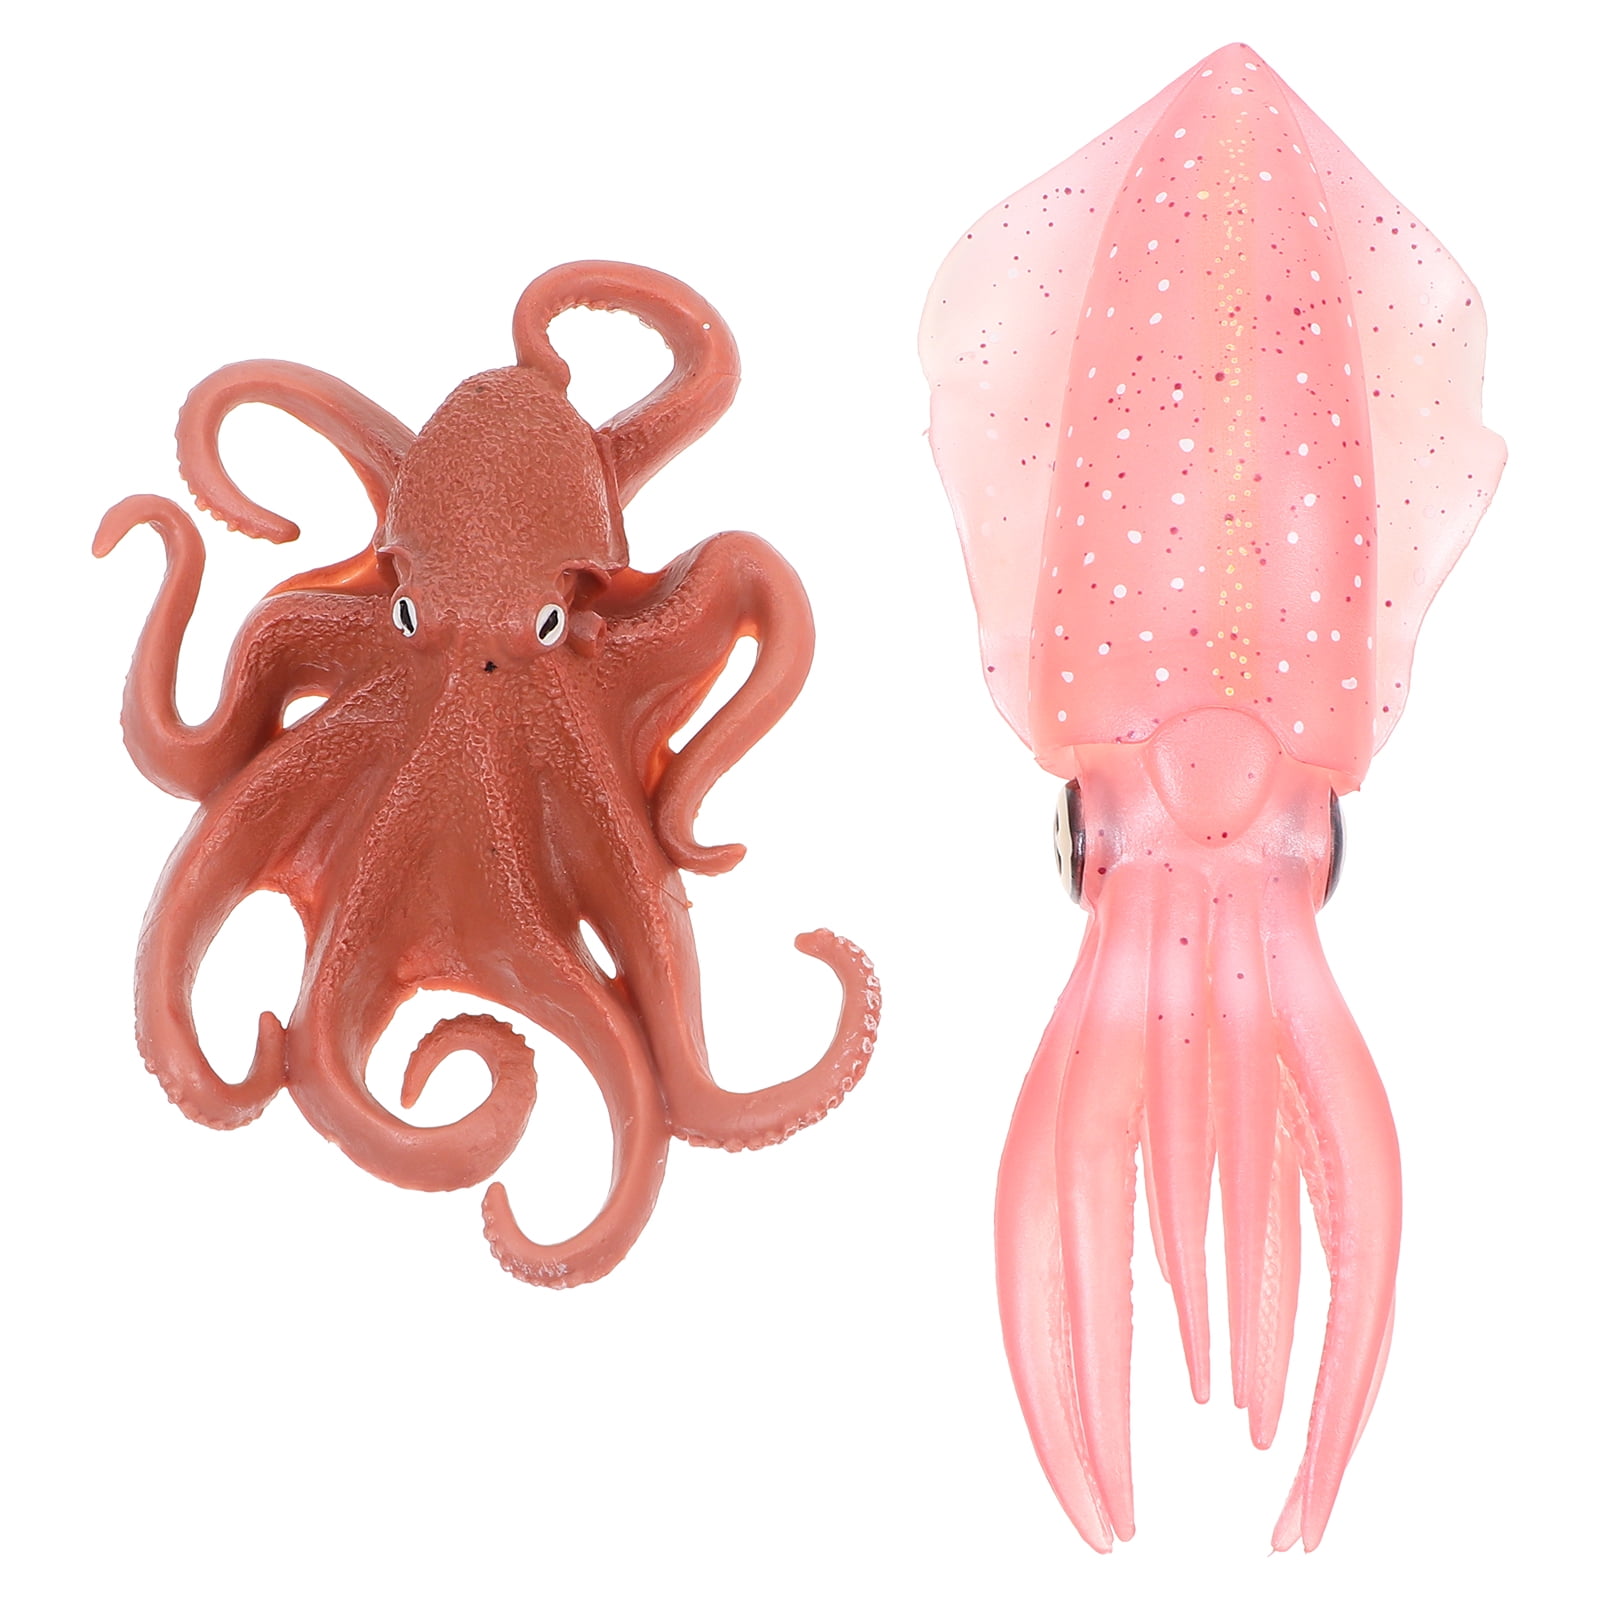 Lot of 4 Nature Octopus Growth Cycle Child Education Learning Teaching Toy 